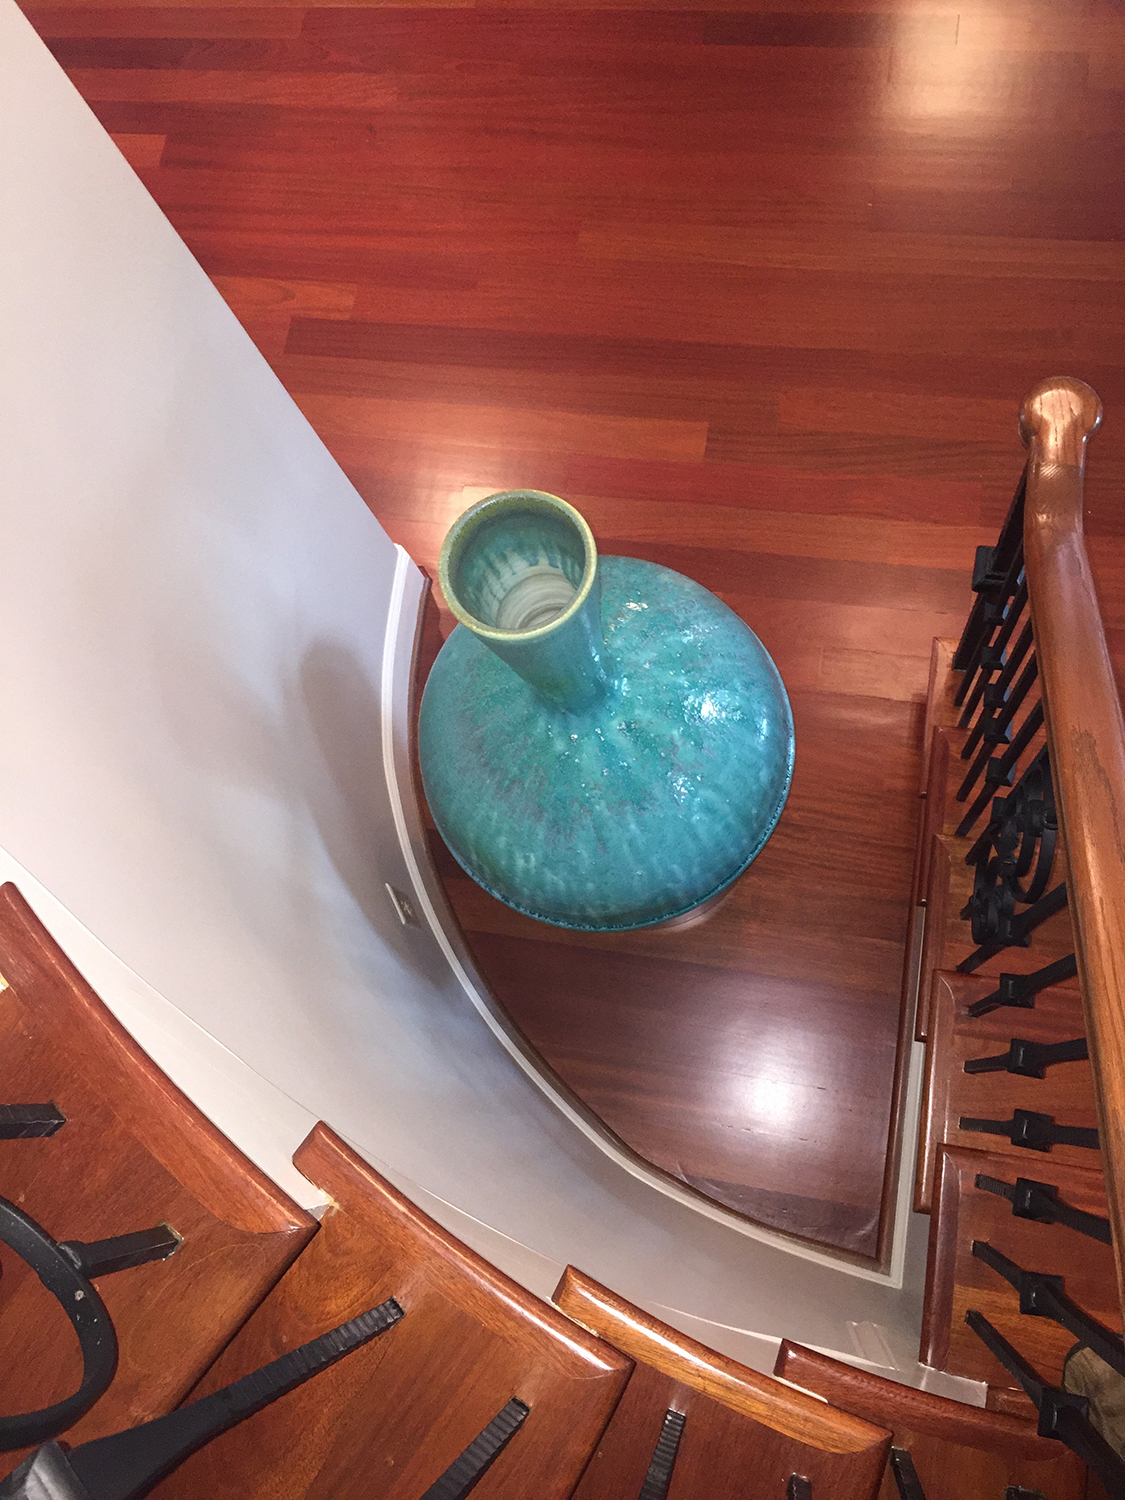   A large Patina Green vase compliments the dramatic stairwell in the home of these collectors.  